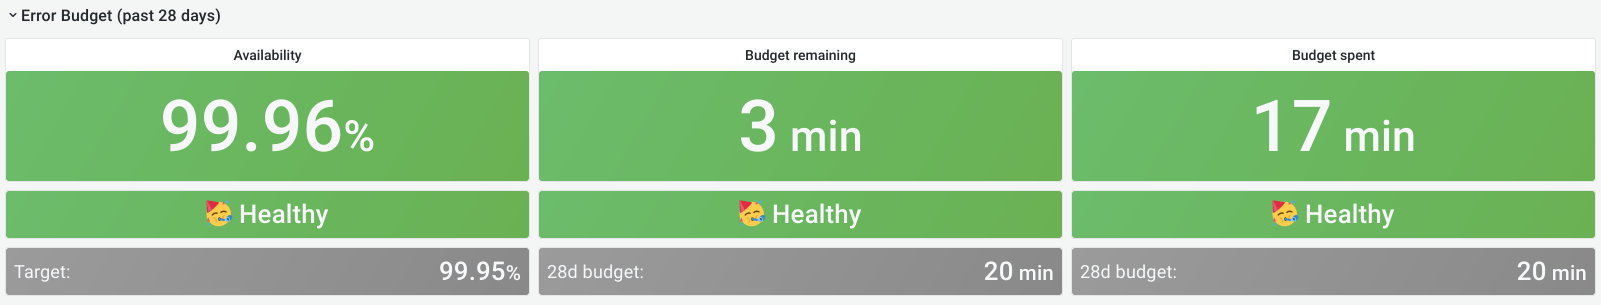 28 day budget